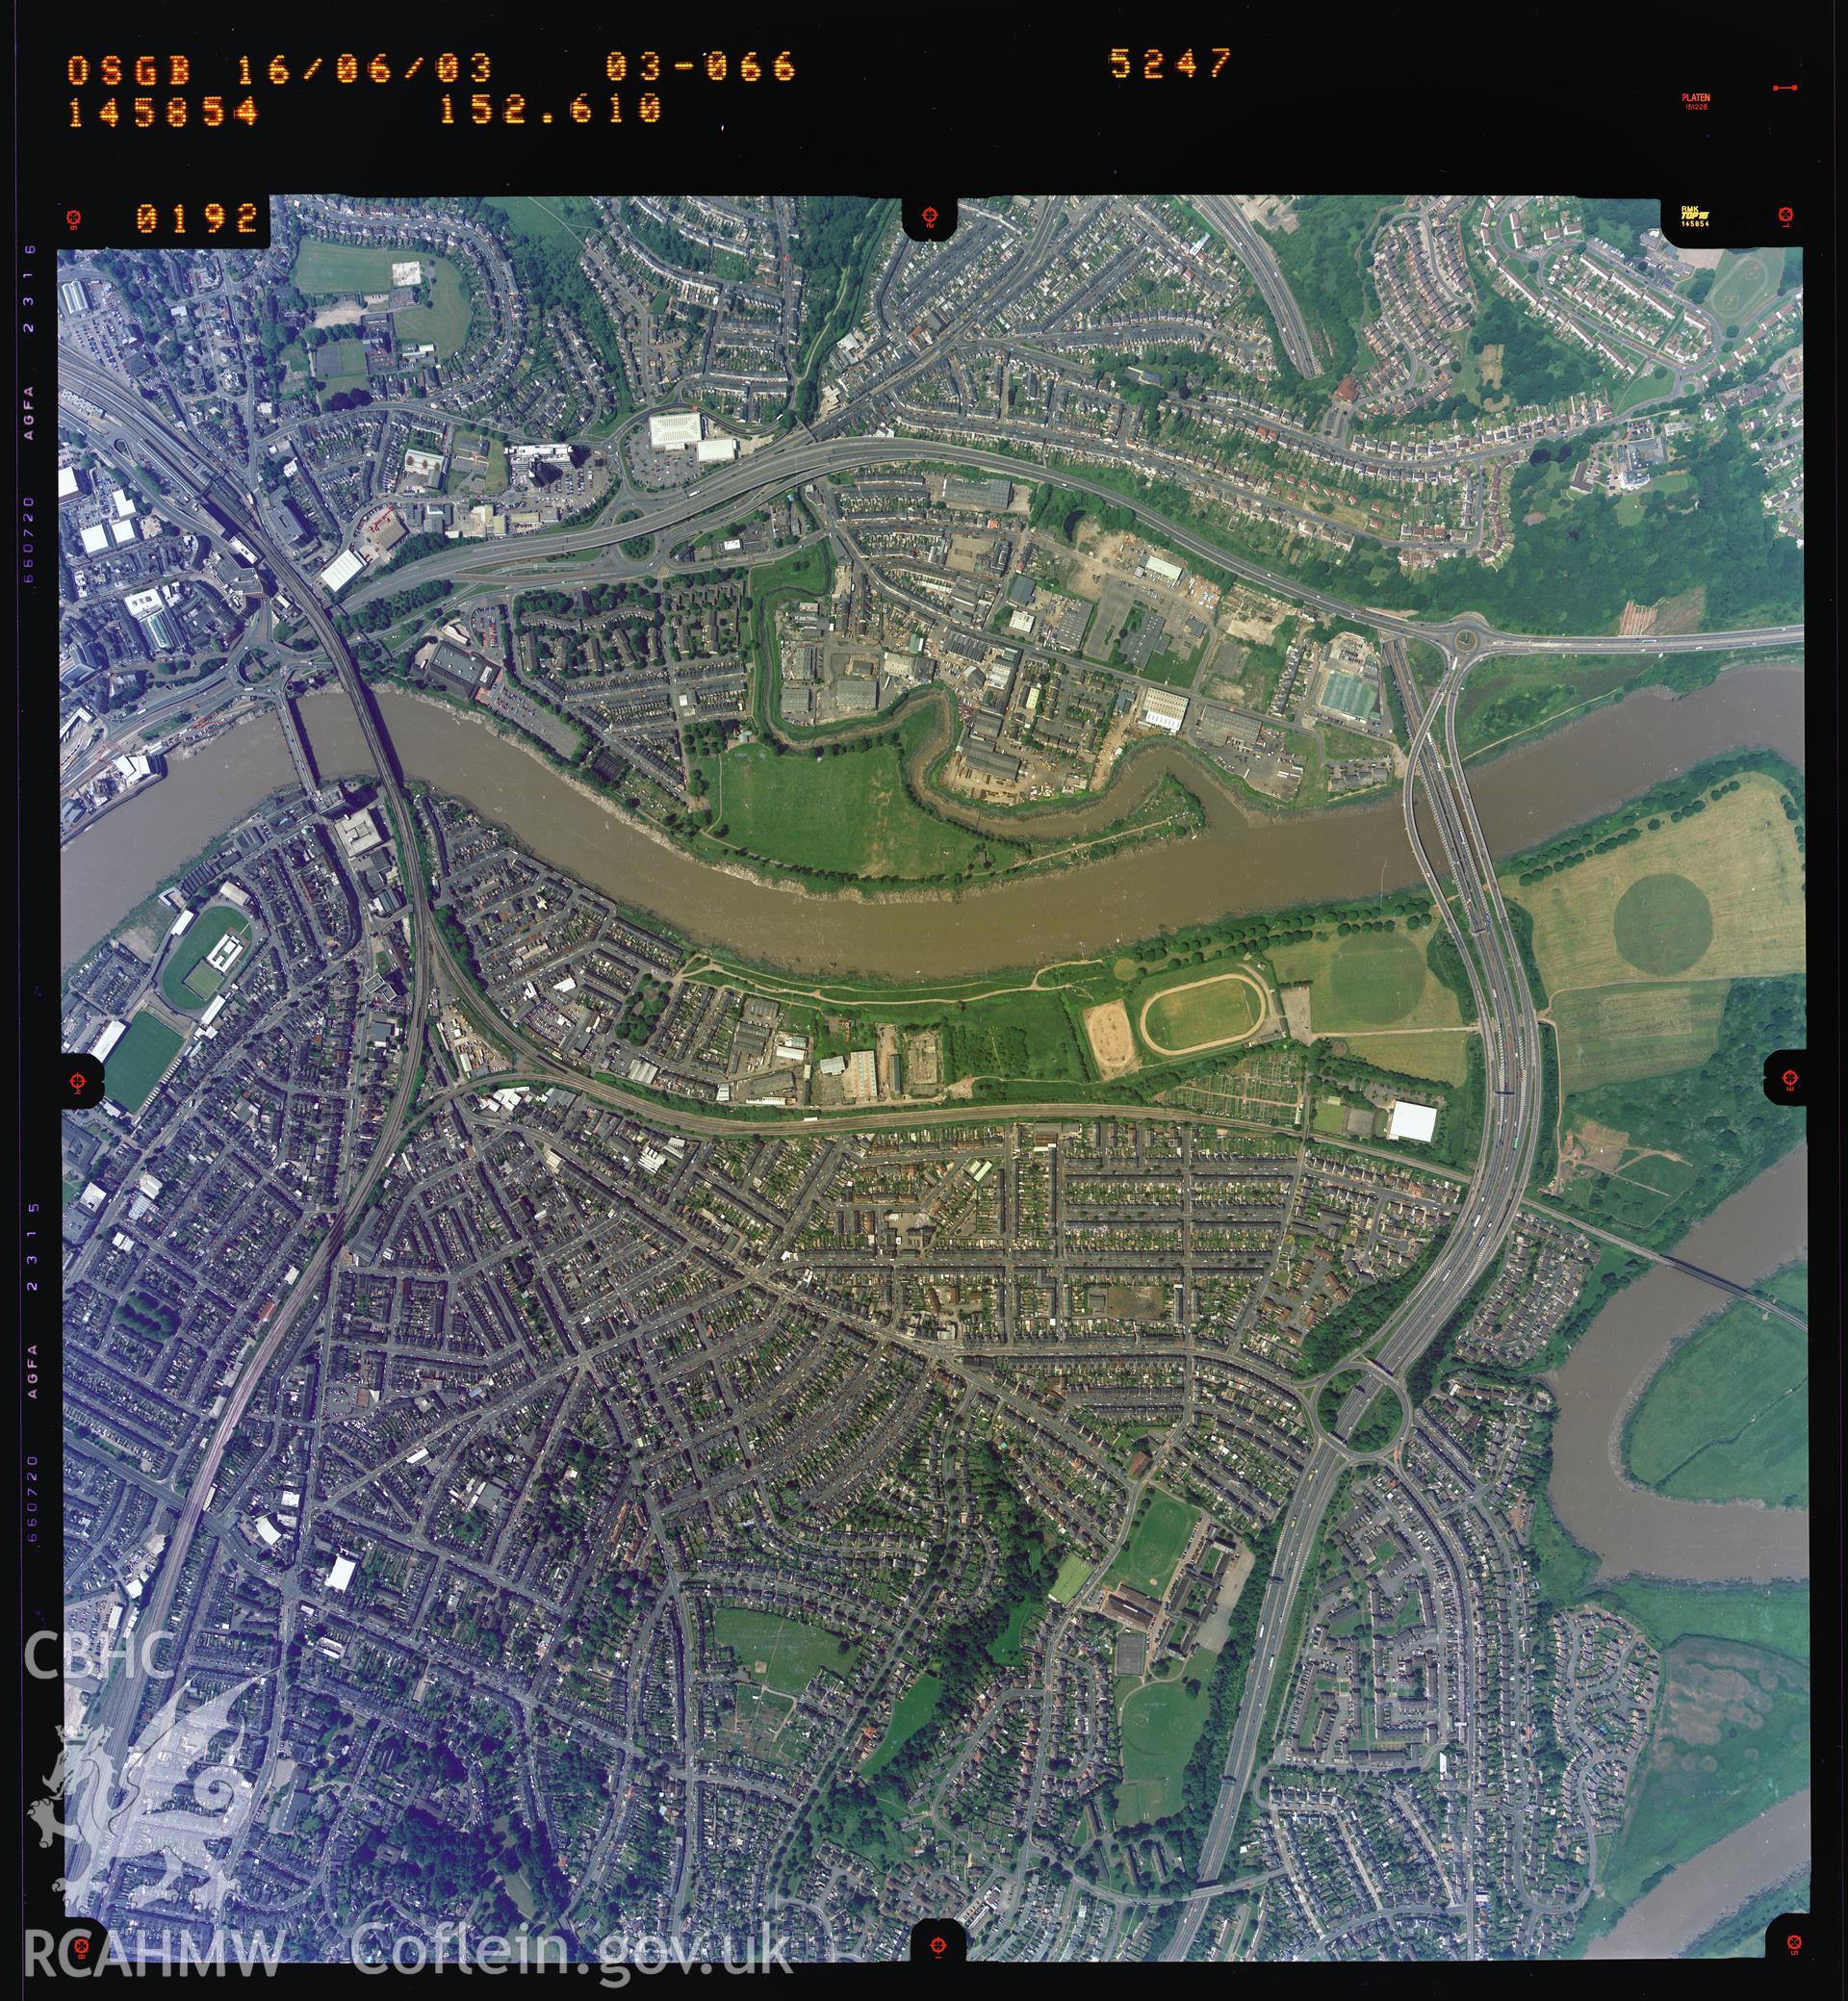 Digitized copy of a colour aerial photograph showing the Orchard Street area of Newport, taken by Ordnance Survey, 2003.